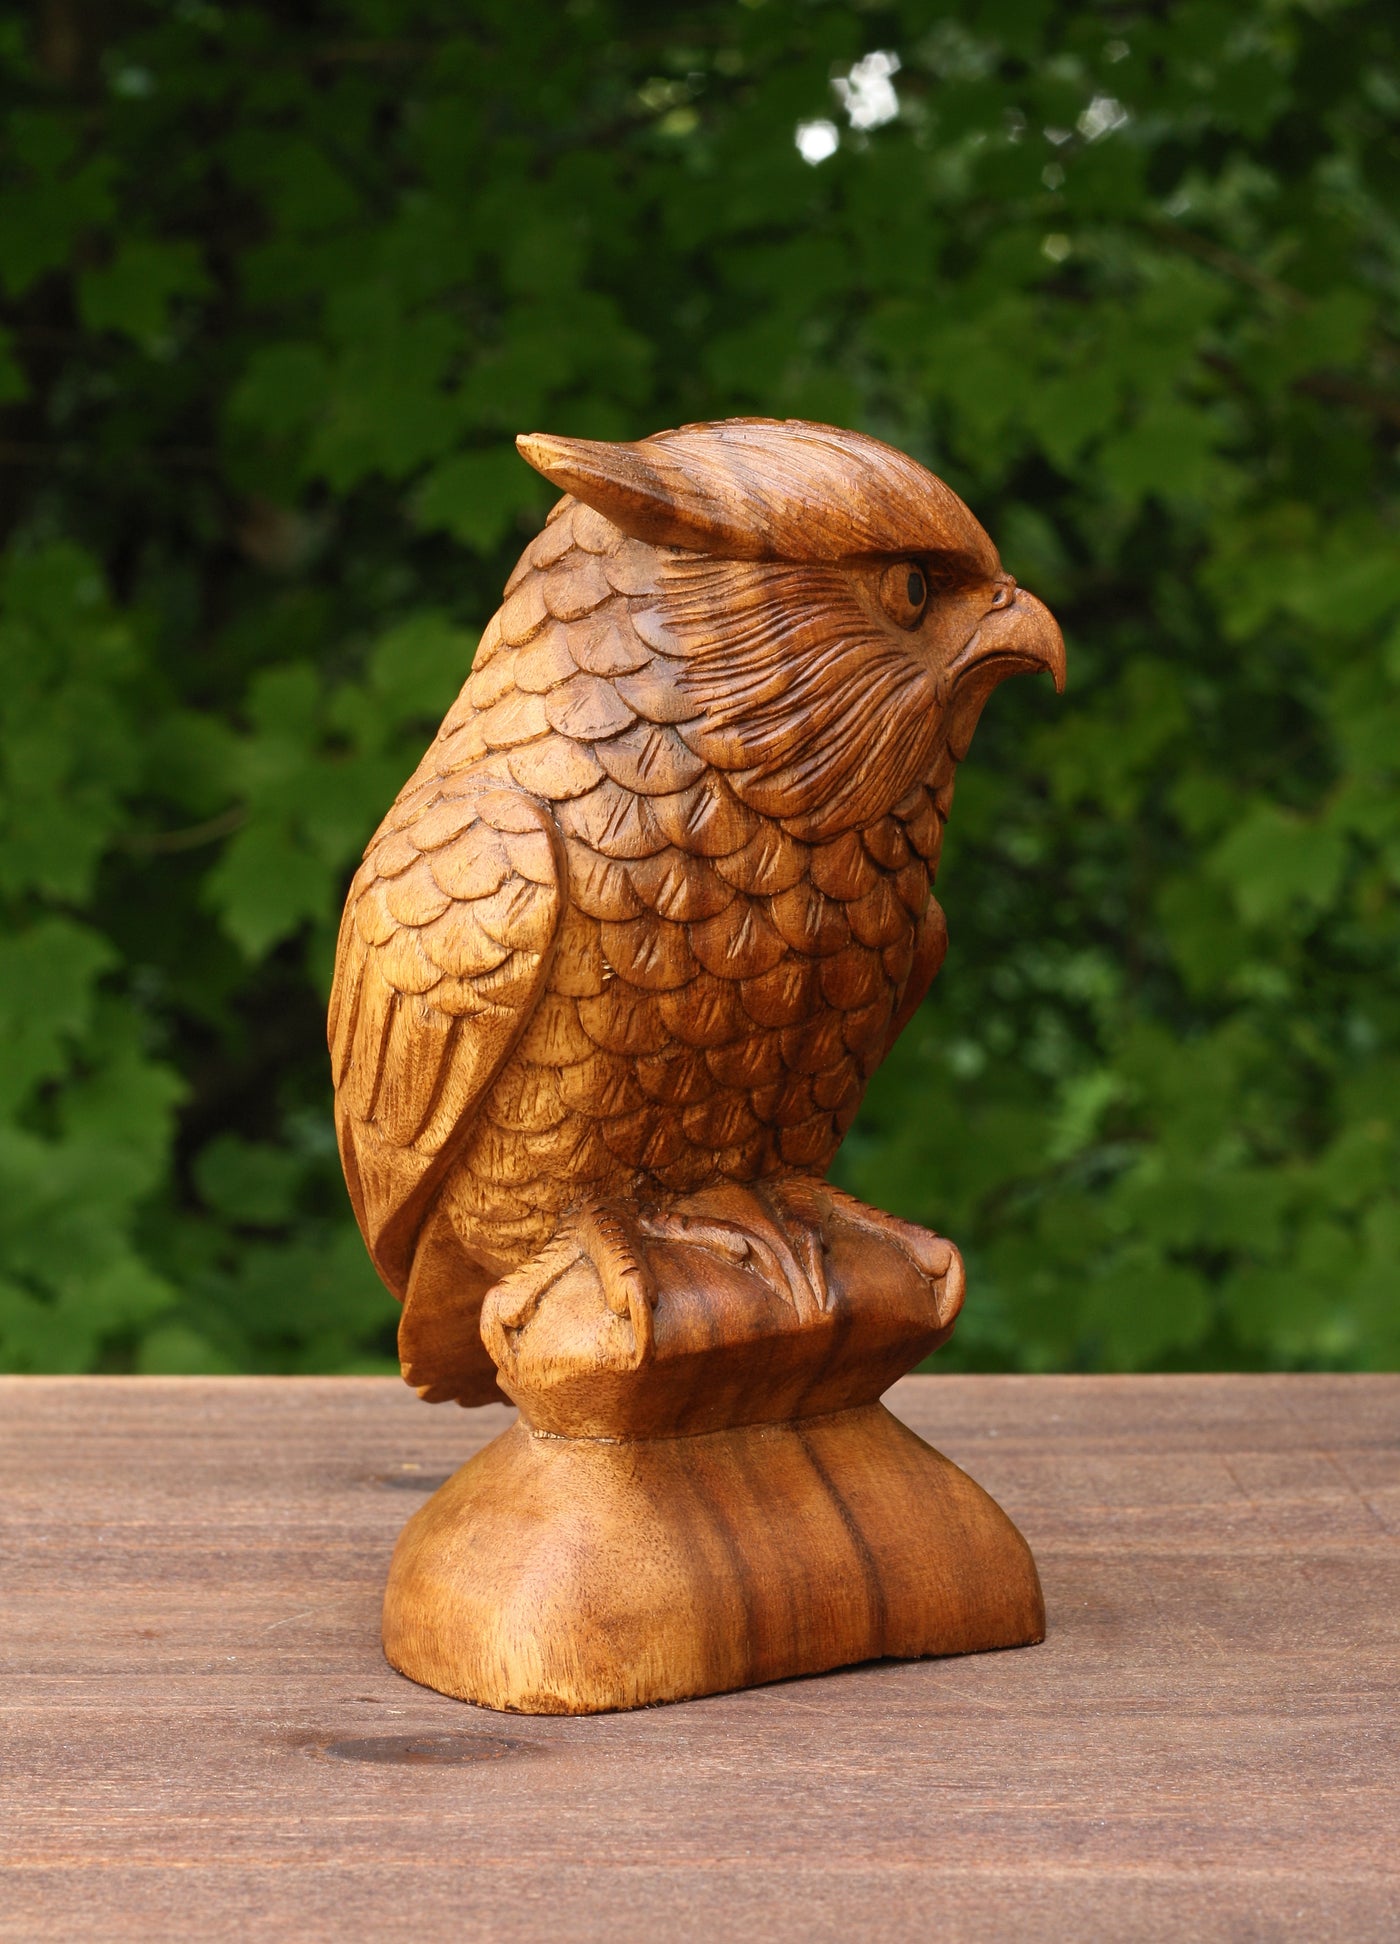 8" Wooden Handmade Owl Statue Handcrafted Figurine Art Home Decor Sculpture Wood Hand Carved Decorative Accent Decoration